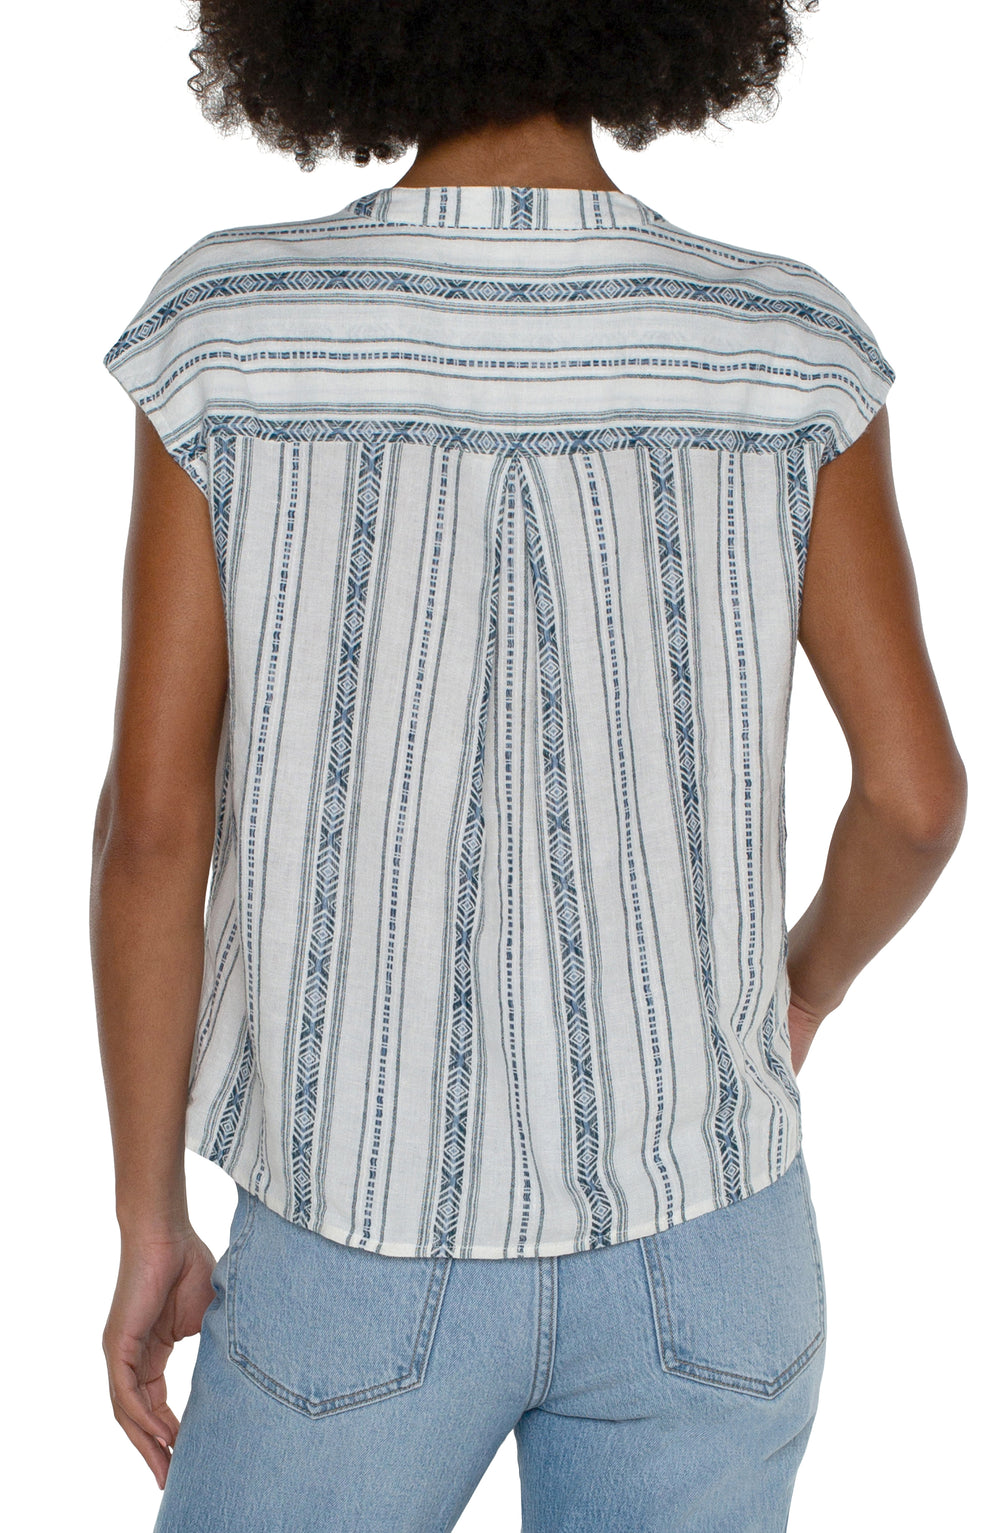 Woven dolman pull-over top in cream with blue stripe - back view -  LM8B83WV13 - Tru Blue Boutique